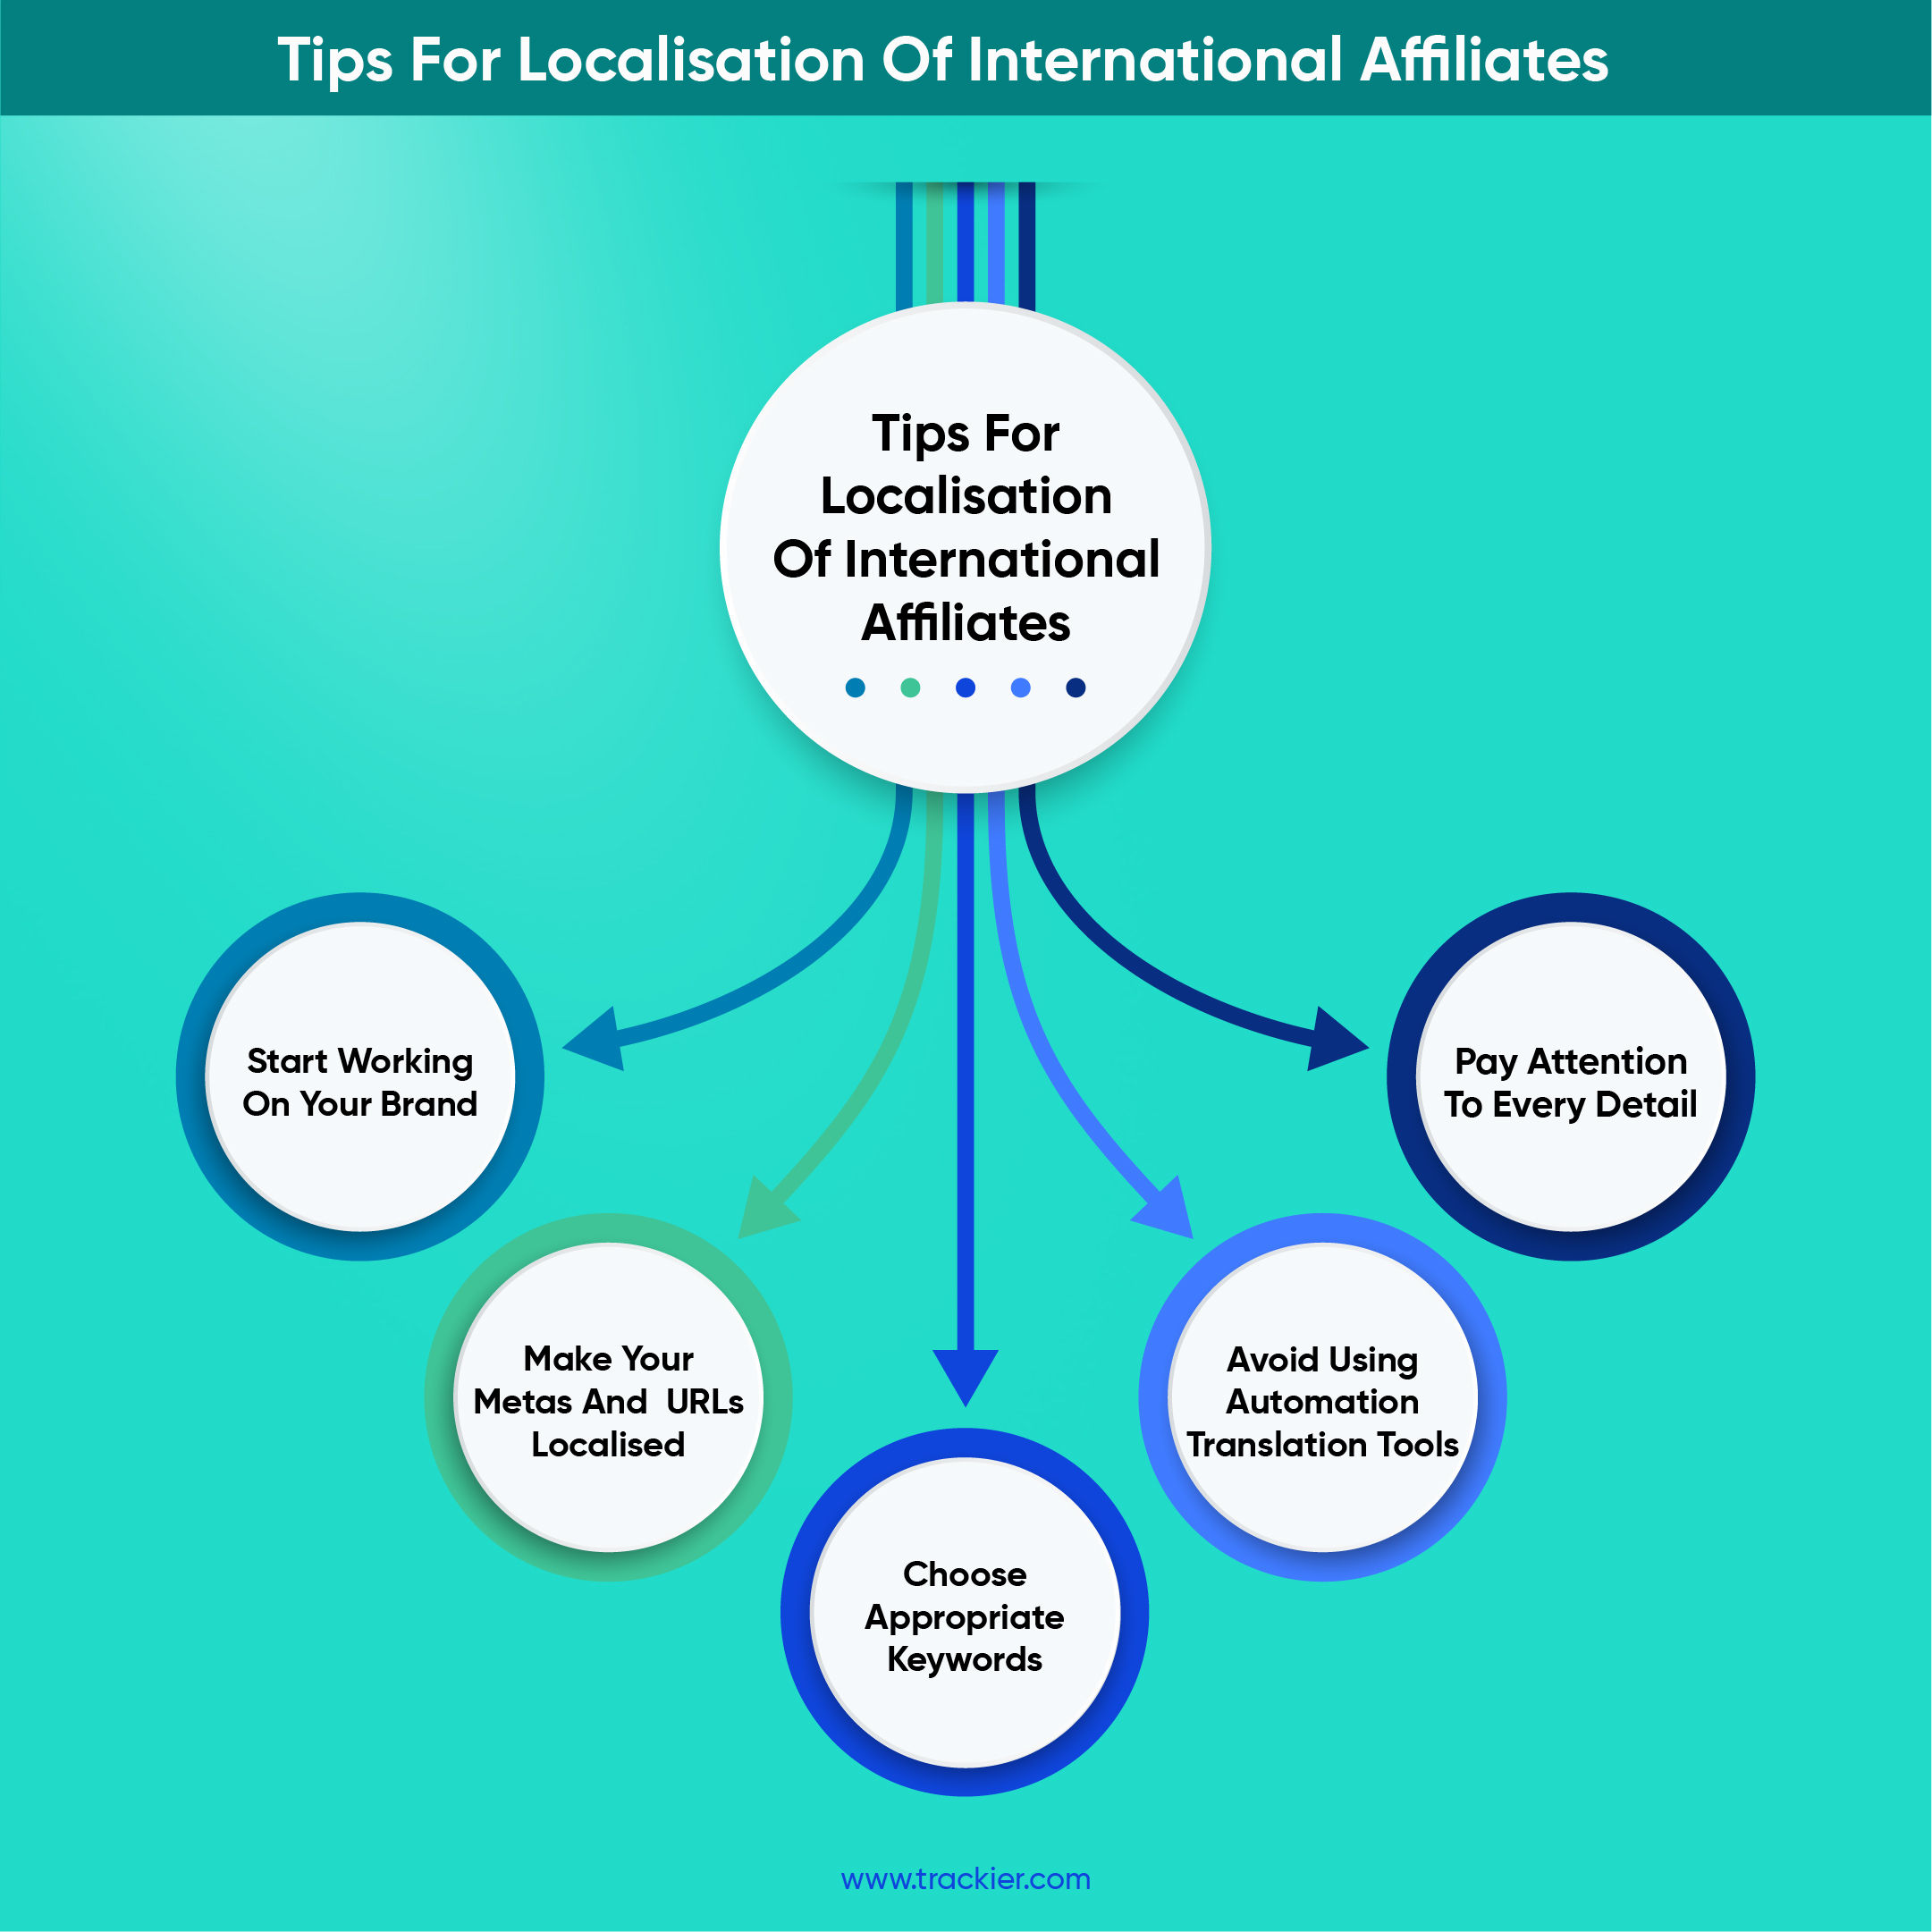 Tips To Avoid Failures For Localizing